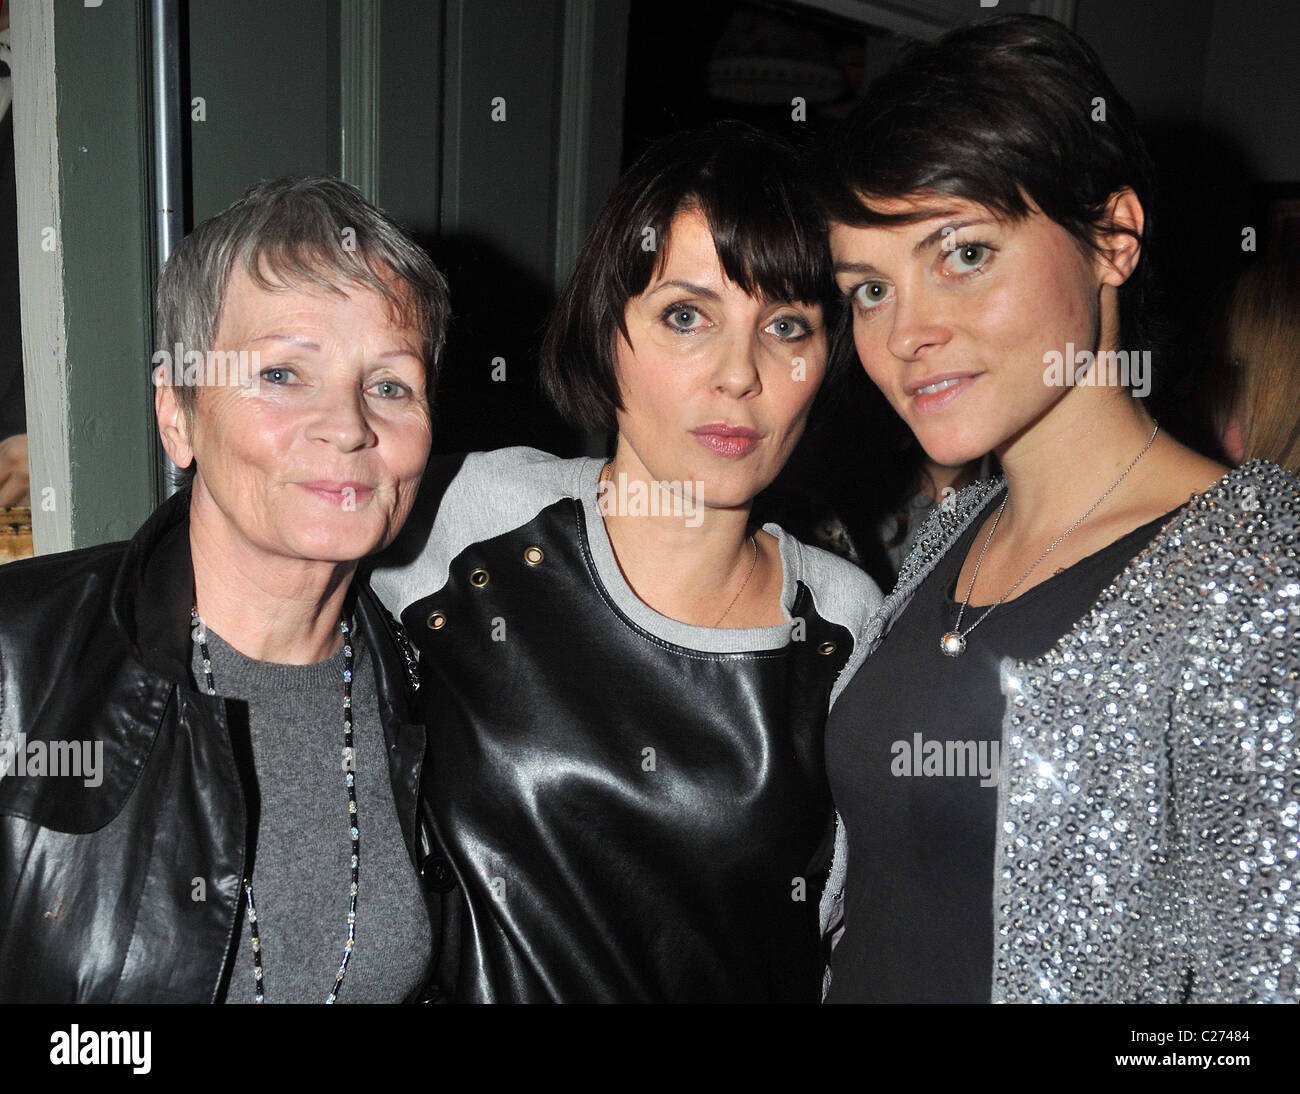 Mary Davidson, Sadie Frost and Holly Davidson Get Tested! charity performance held at The Paradise Club. London, England - Stock Photo